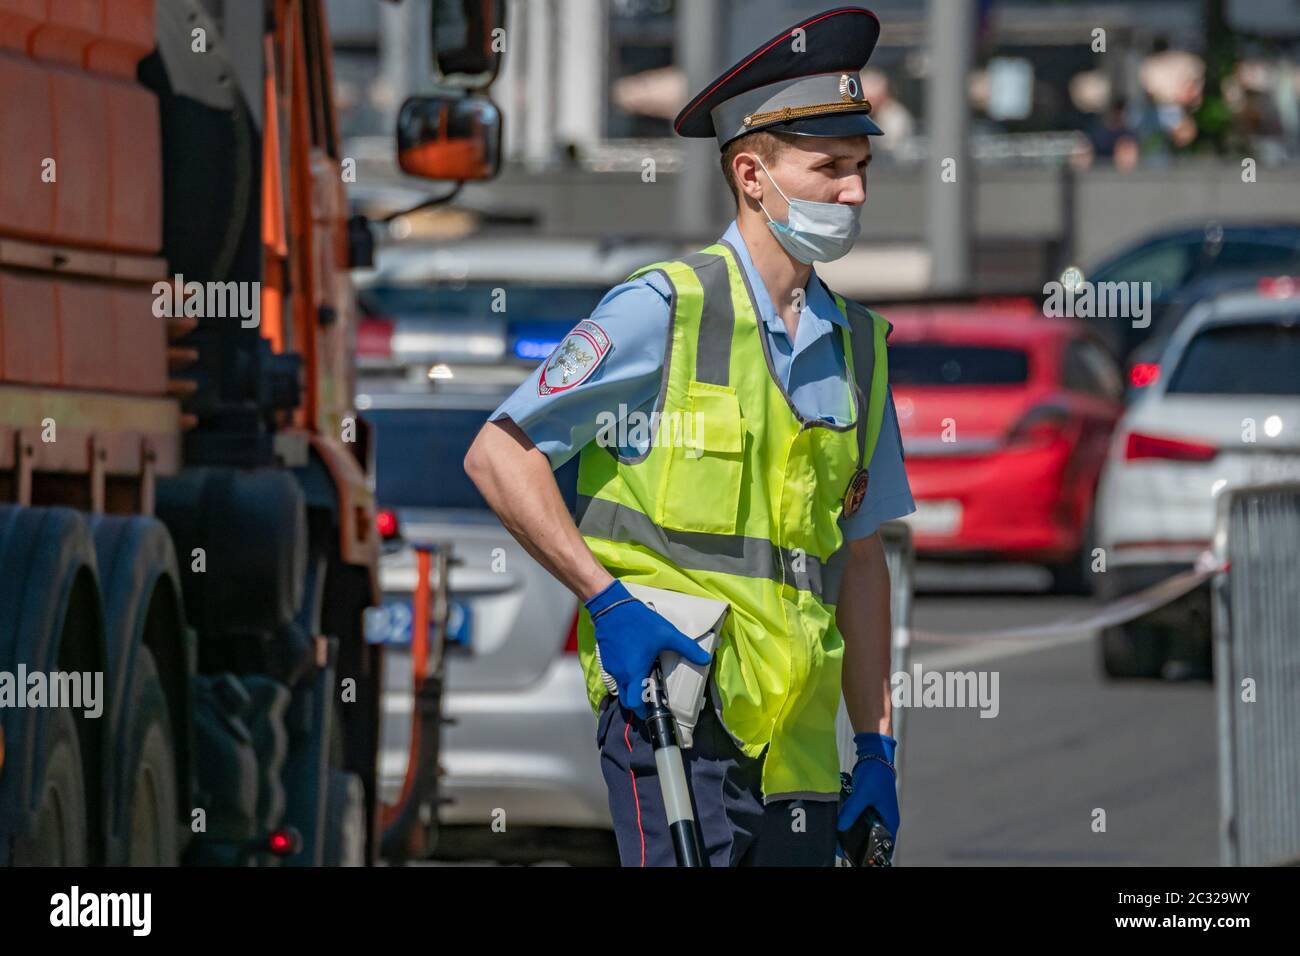 Russia, Moscow. Since 7 June, Moscow has experienced hot weather with daytime temperatures rising over +25 degrees Celsius. On 17 June, the temperatur Stock Photo